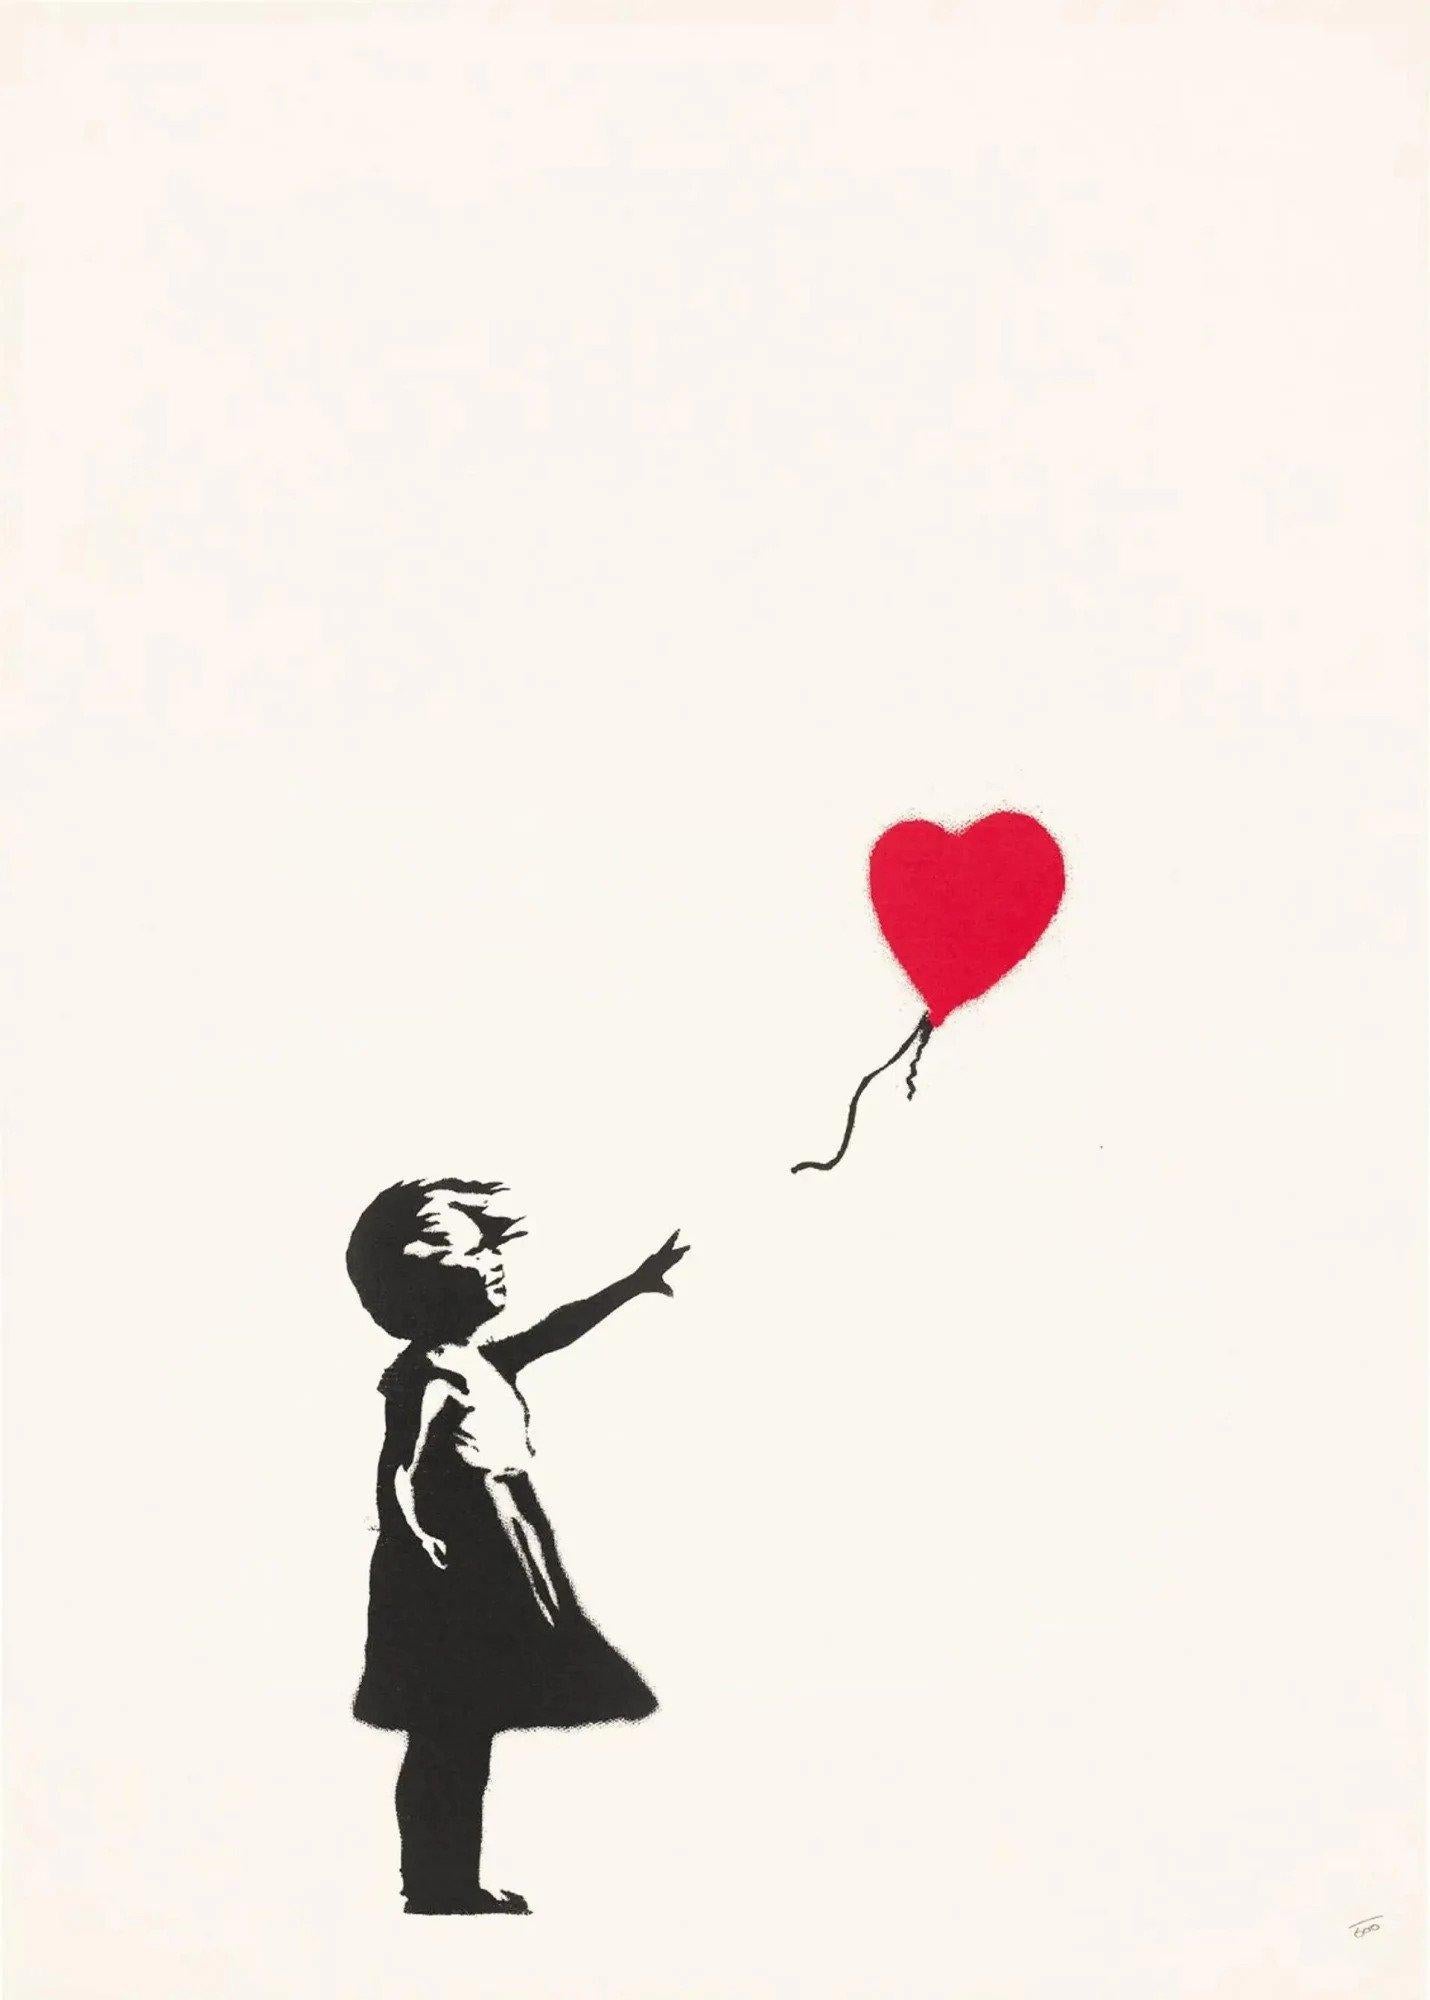 Girl With A Balloon
2004

By Banksy

Banksy's 'Girl with a Balloon' portrays a young girl reaching for a red, heart-shaped balloon, encapsulating themes of fleeting innocence and the ephemeral nature of dreams.

Banksy is an elusive street artist